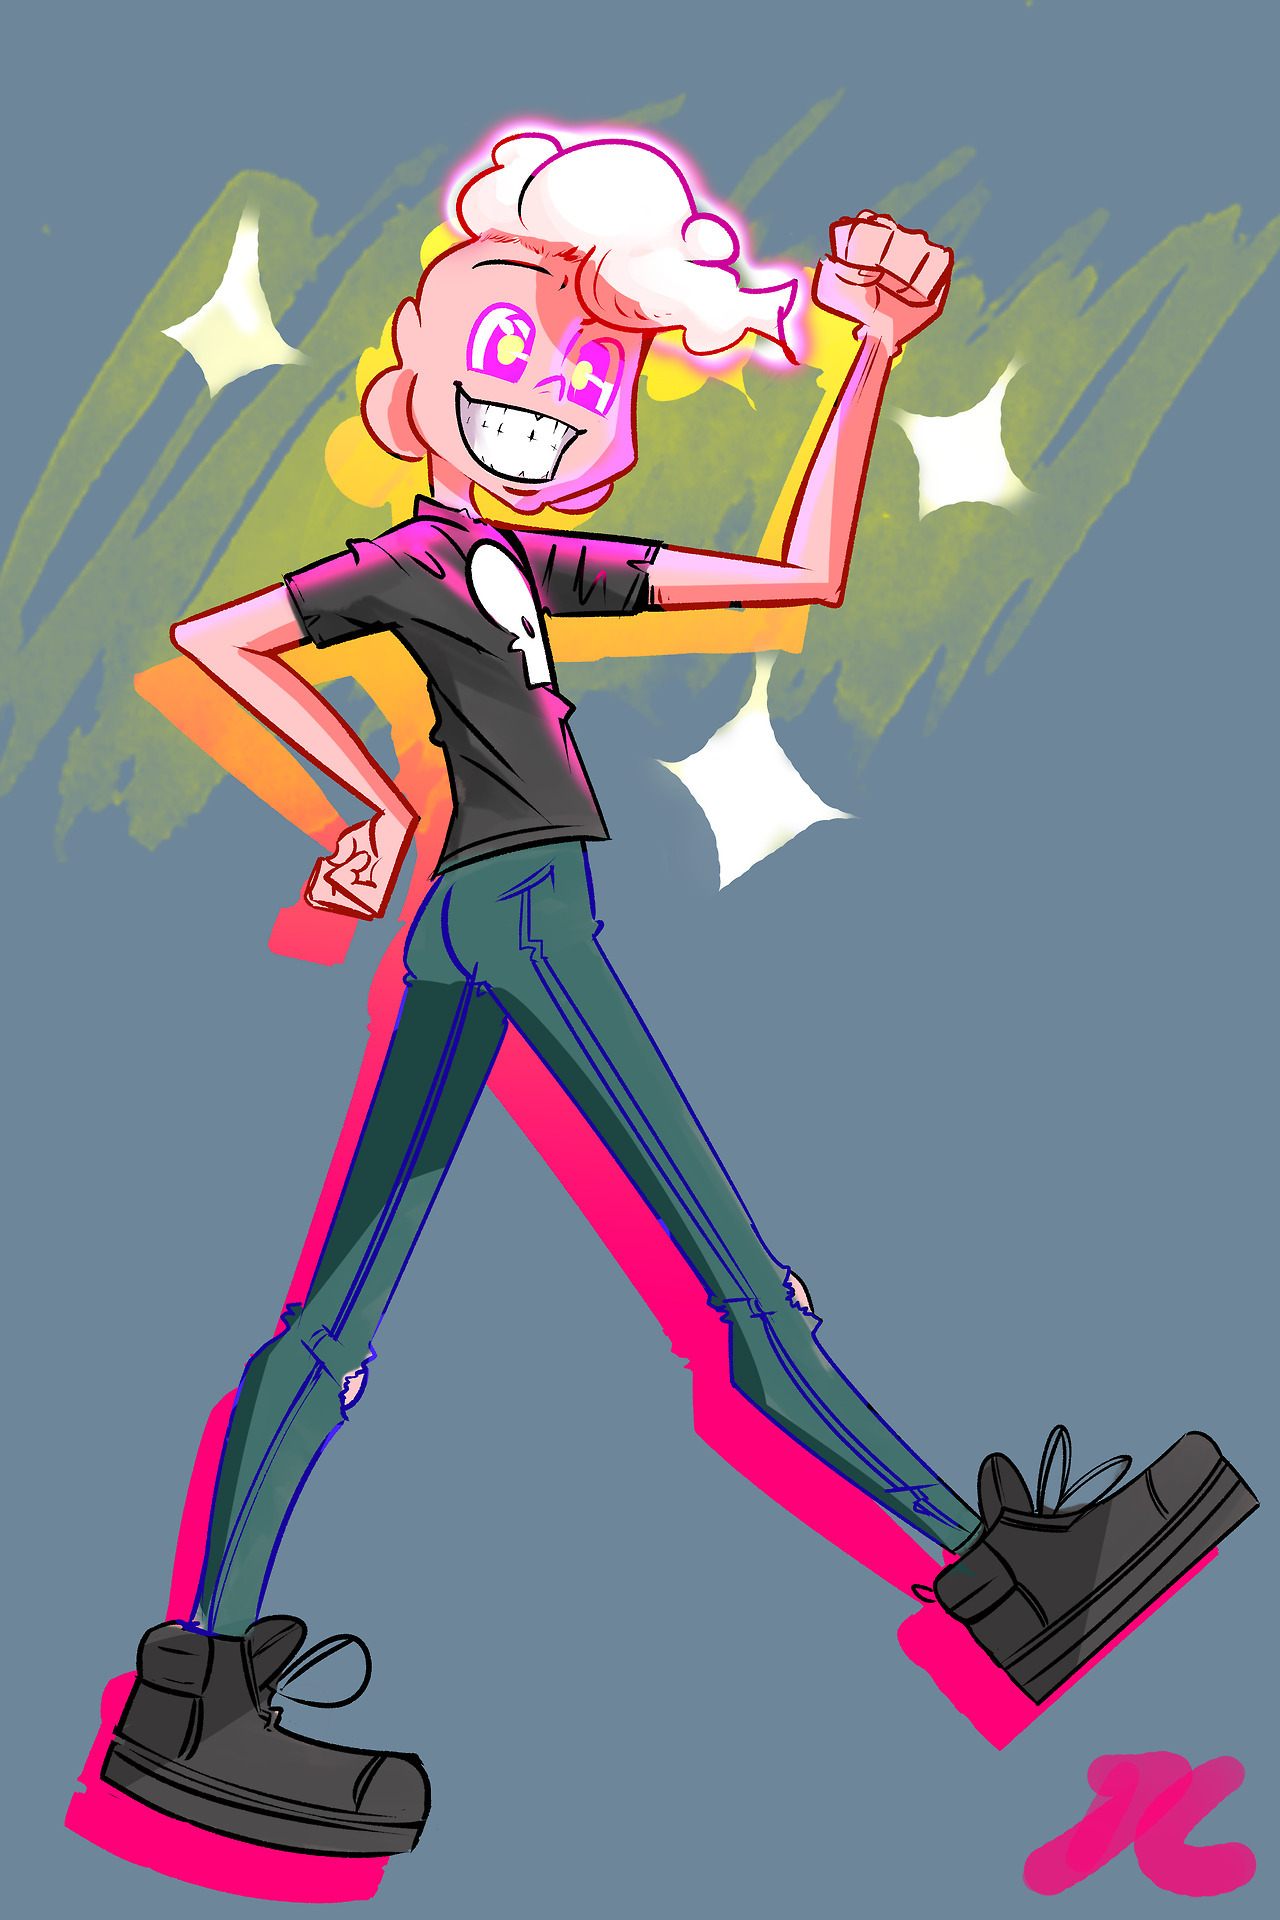 suddenly lars is my favorite! About to start up comissions starting at $30 Hmu!